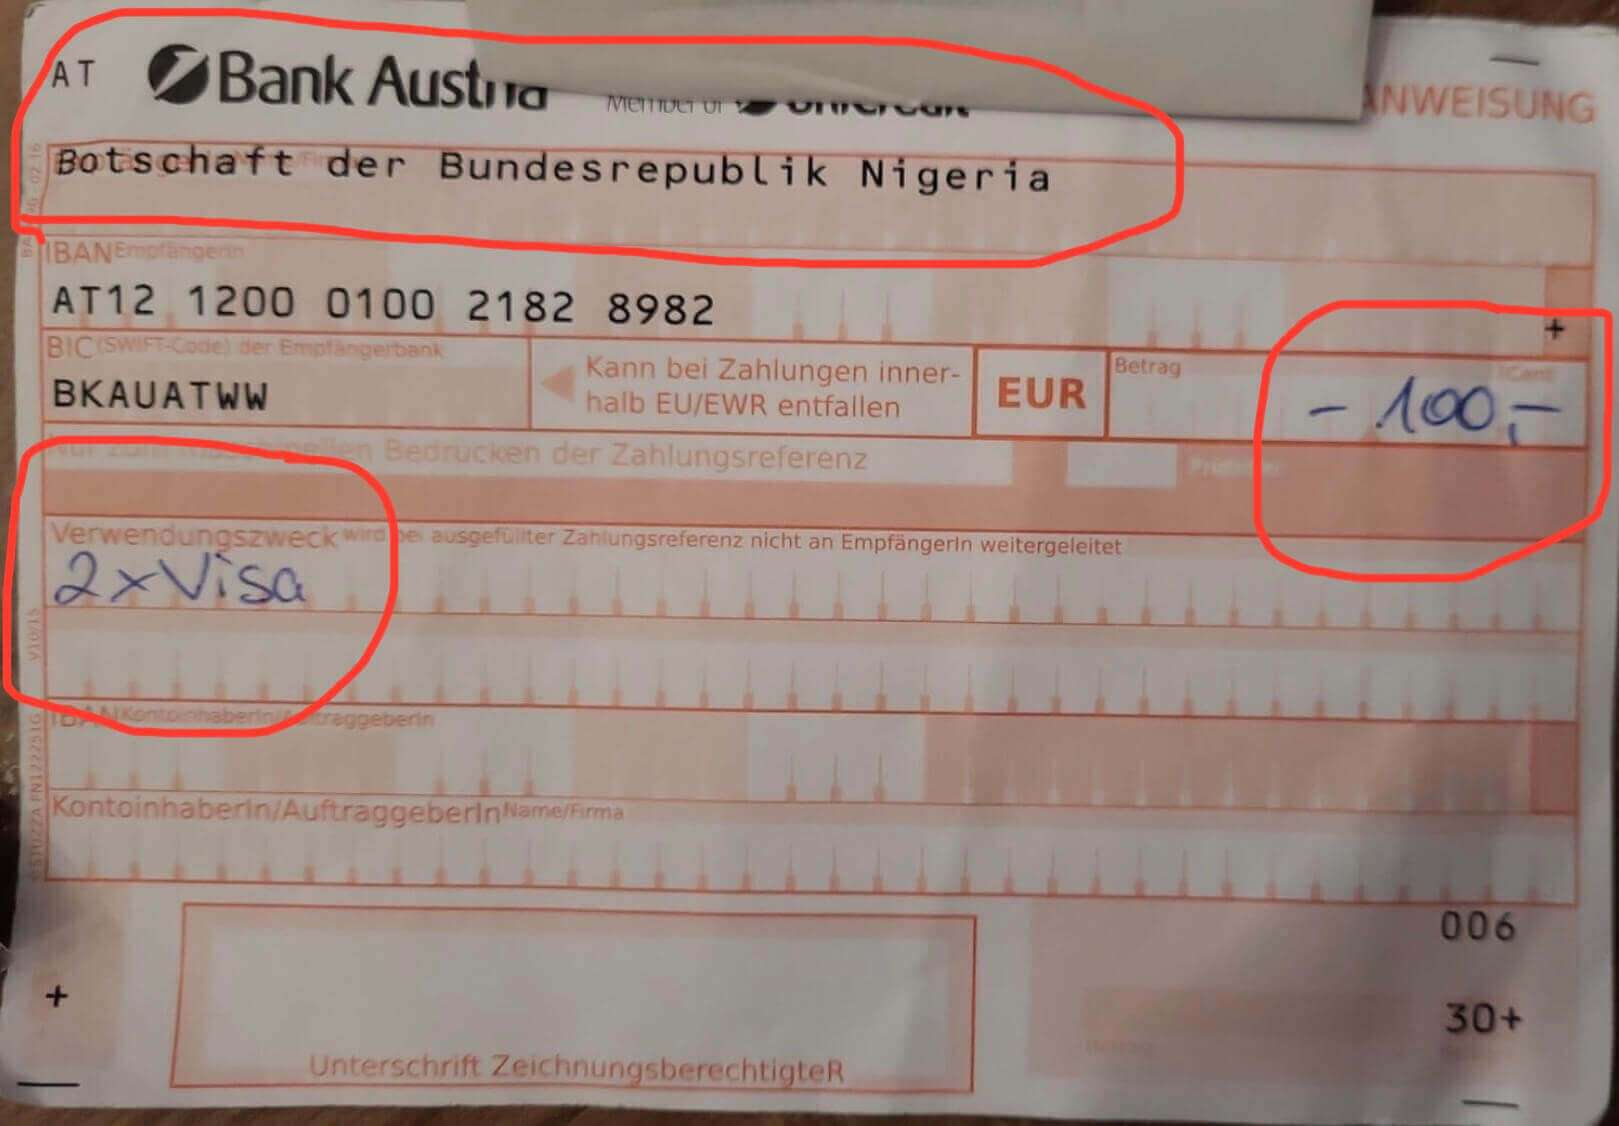 Nigerian Embassy in Austria charges extra €50 for visa and €30 for passport – Ahamefule alleges